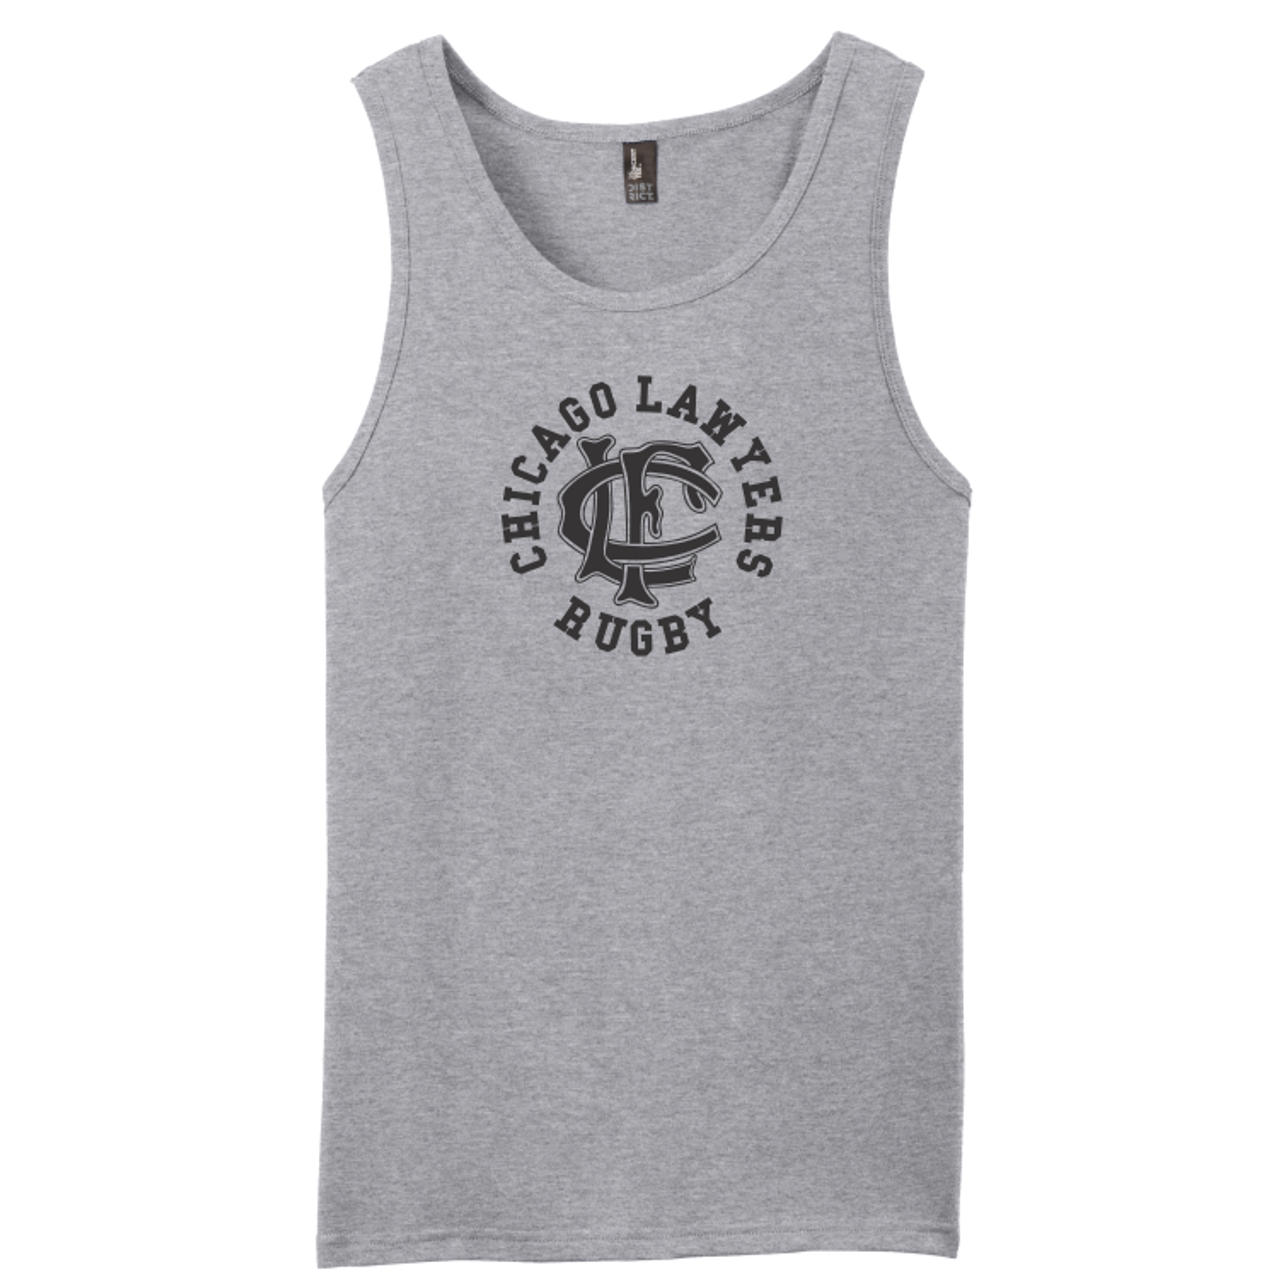 Chicago Lawyers Tank Top, Gray